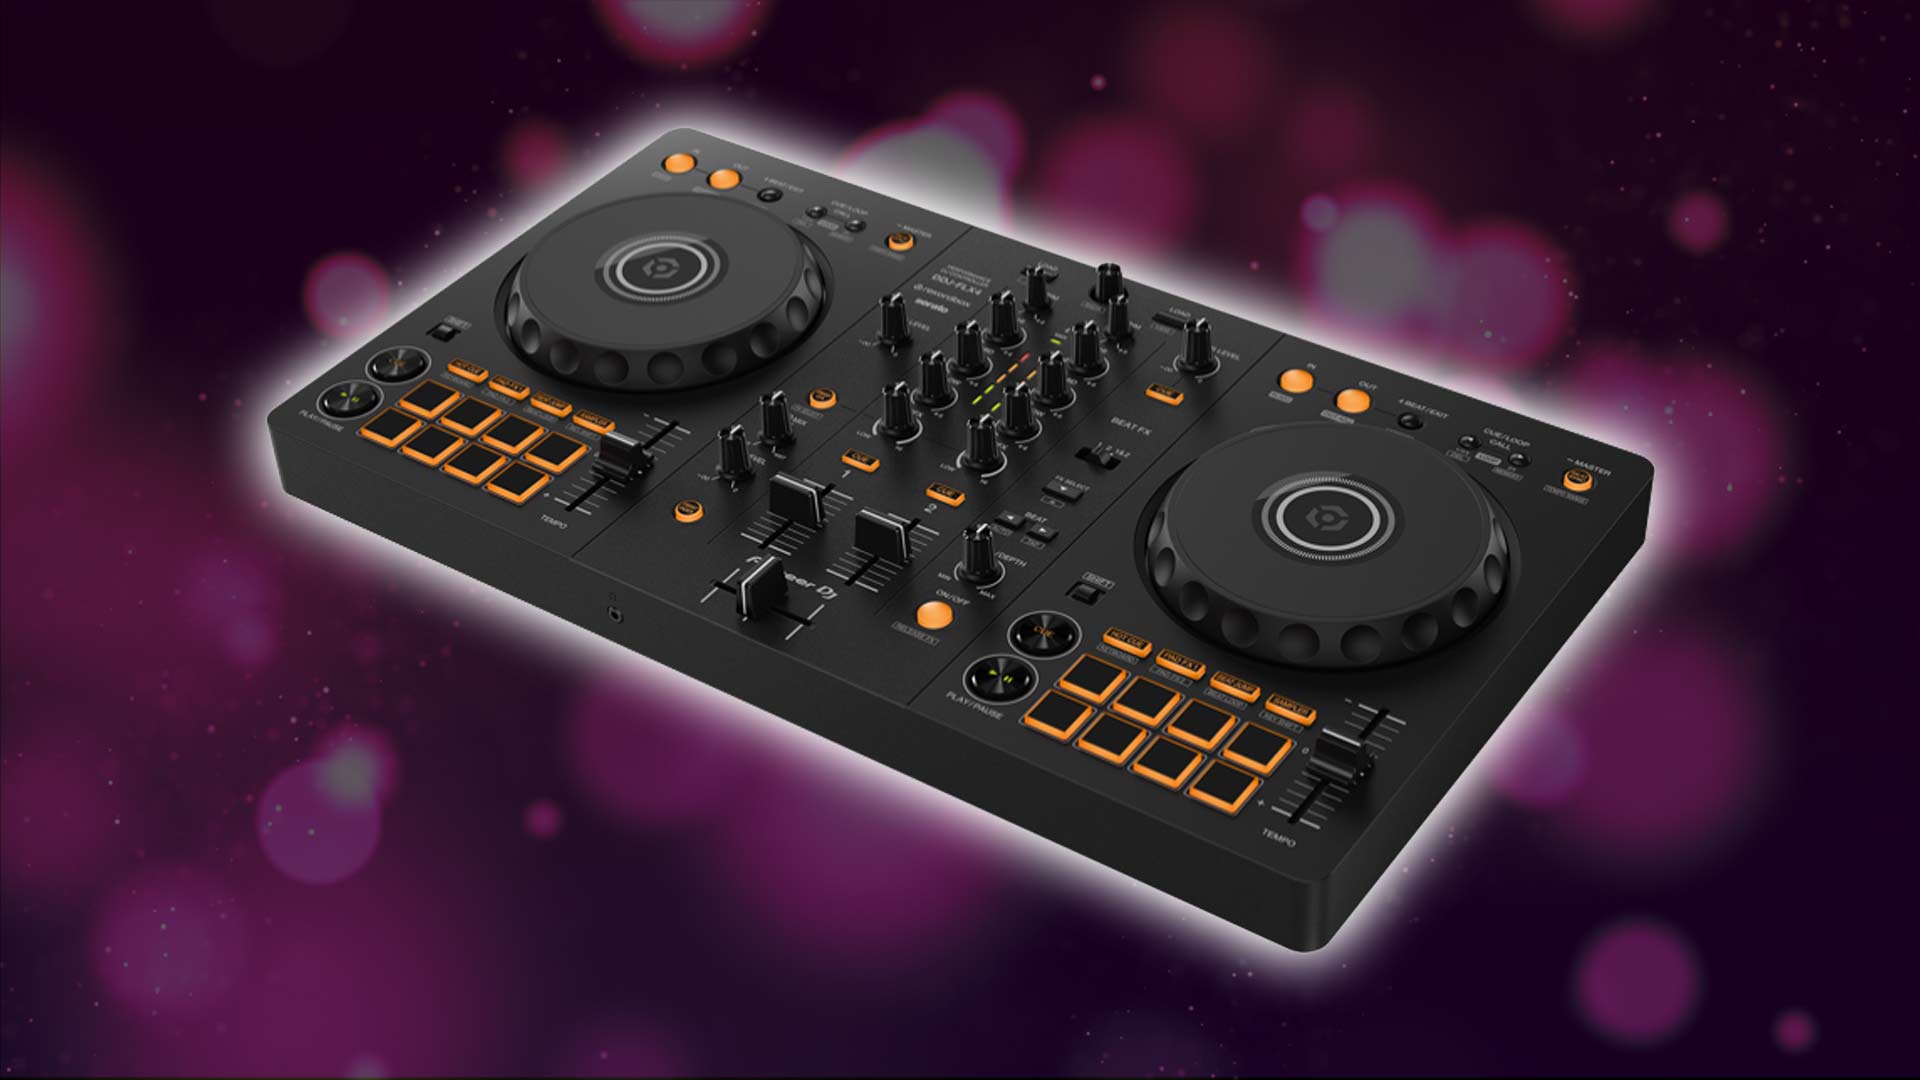 Pioneer DJ DDJ-FLX4 On A Colorful Background As The Header Image for My Unpopular Opinion About Pioneer DJ's new entry level controller